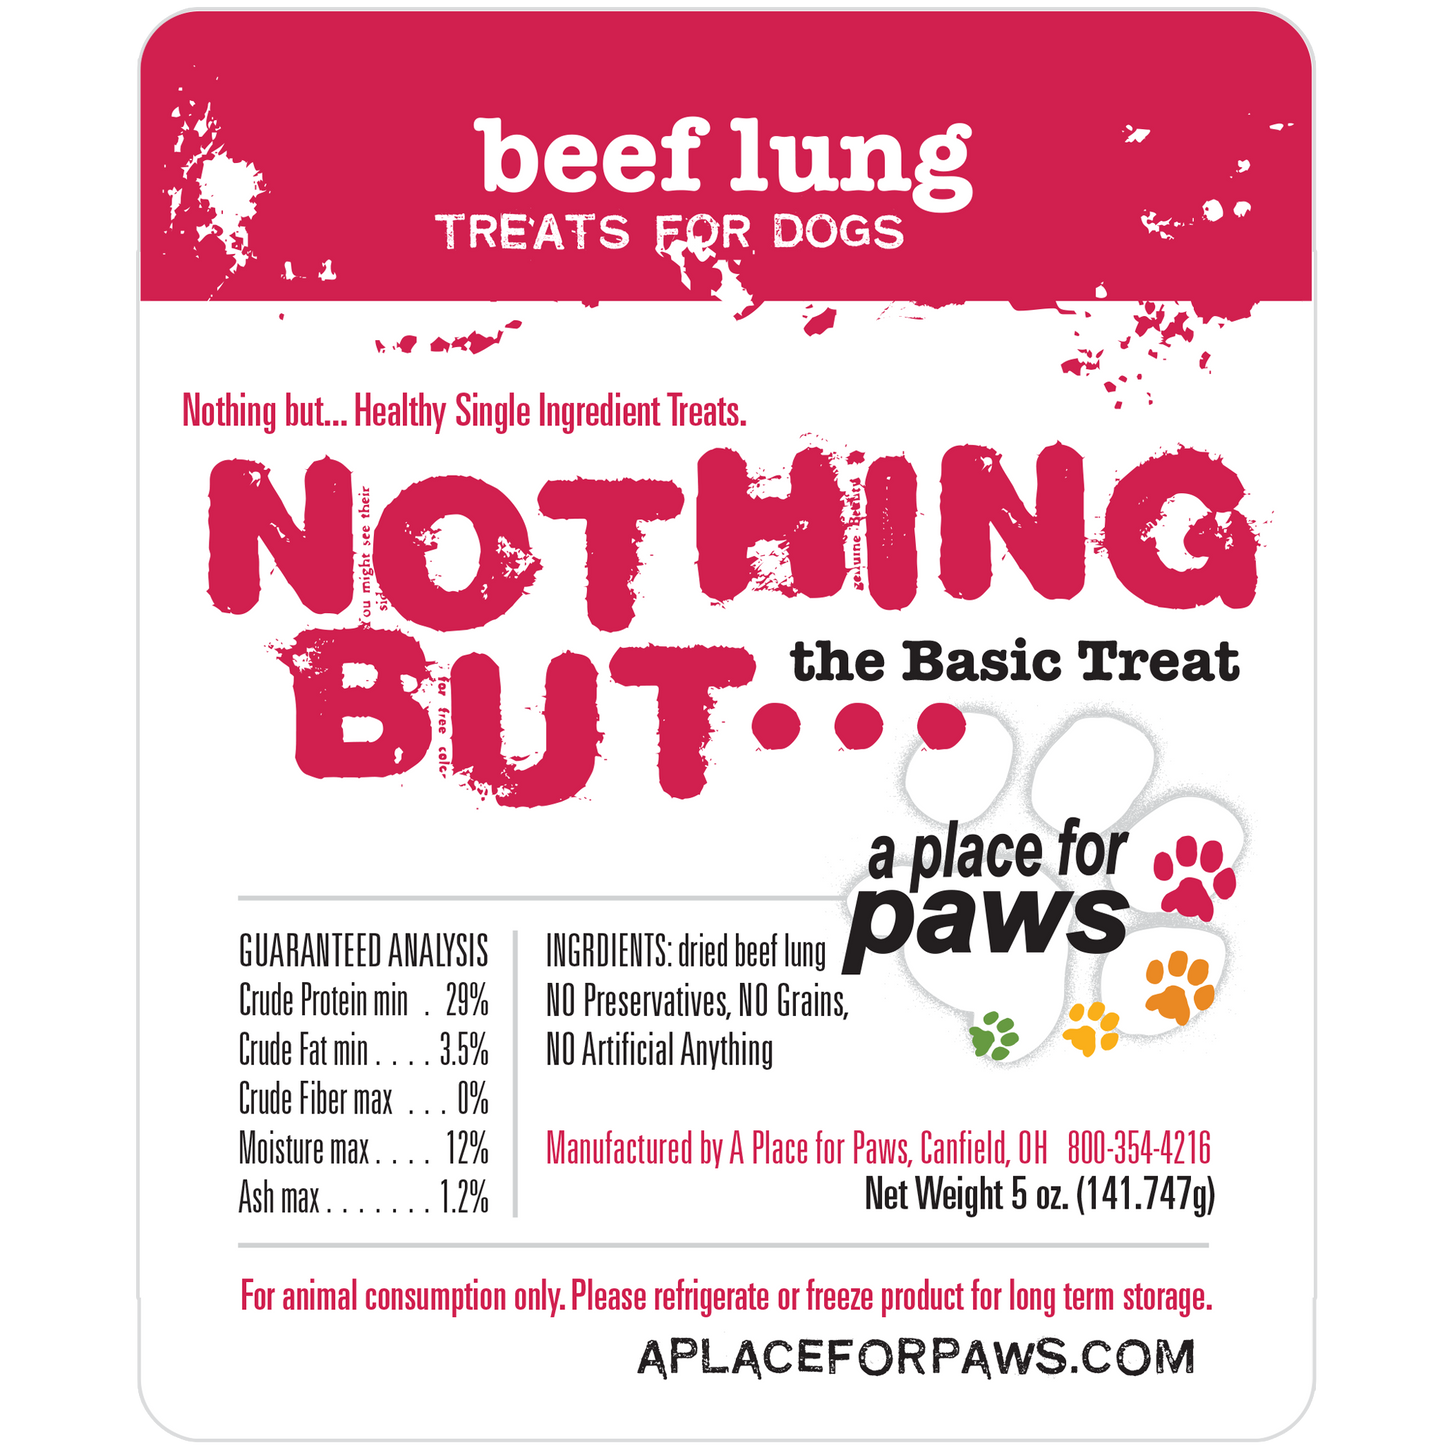 Nothing But… Beef Lung